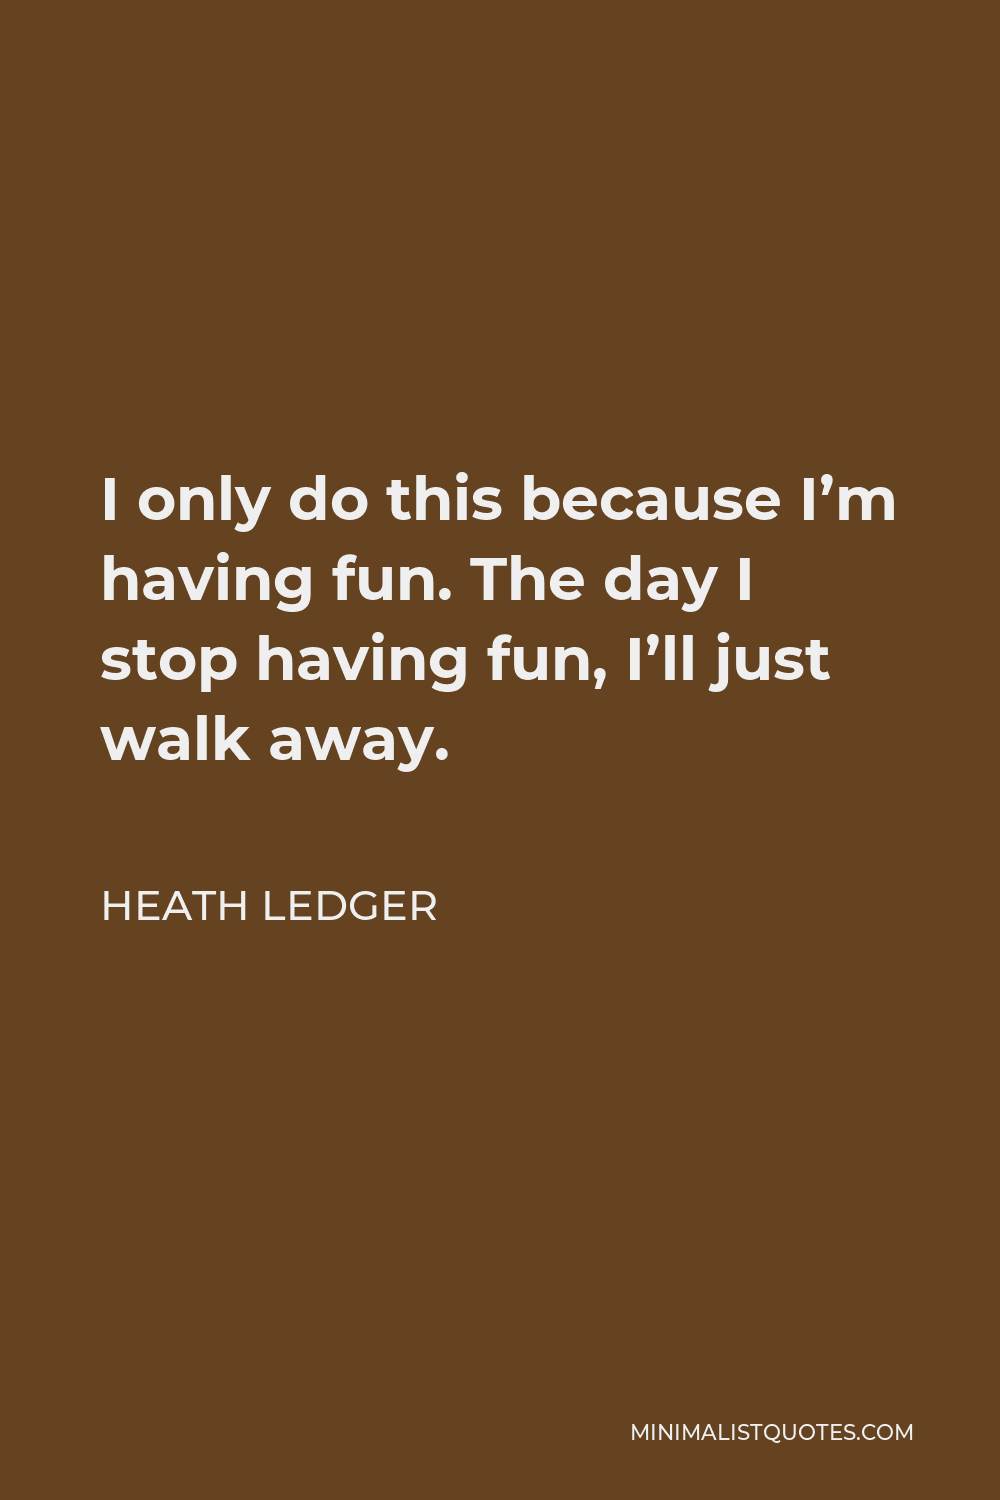 Heath Ledger Quote - I only do this because I’m having fun. The day I stop having fun, I’ll just walk away.